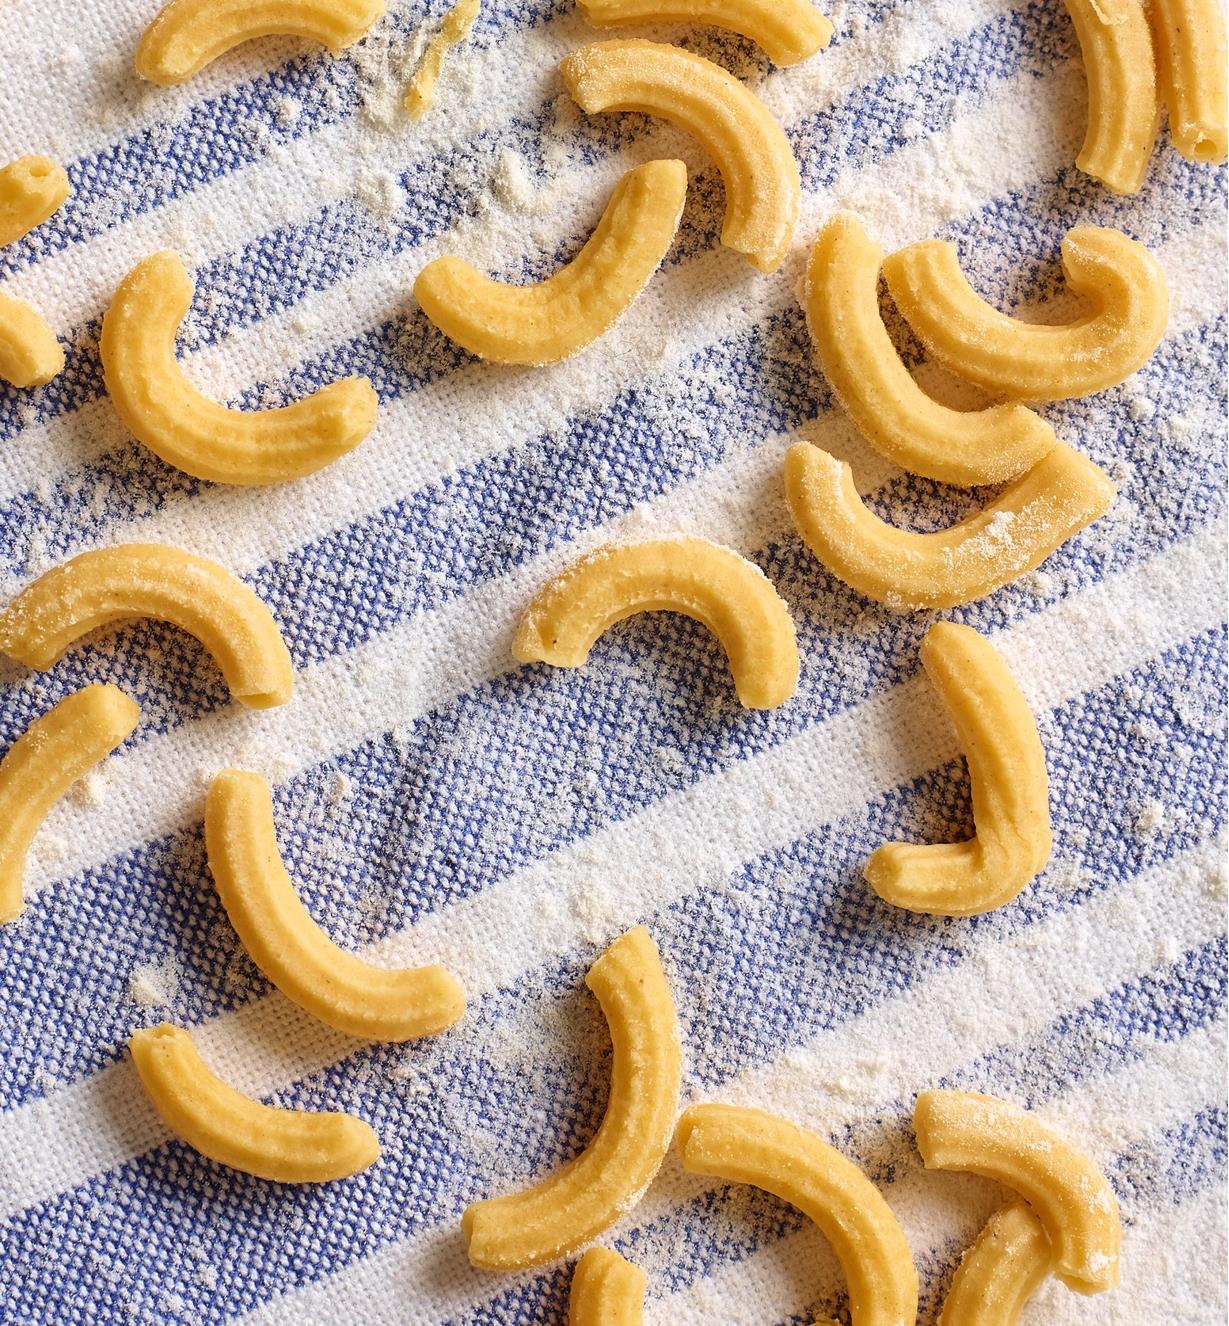 Fresh macaroni noodles made with the Marcato Pasta Extruder